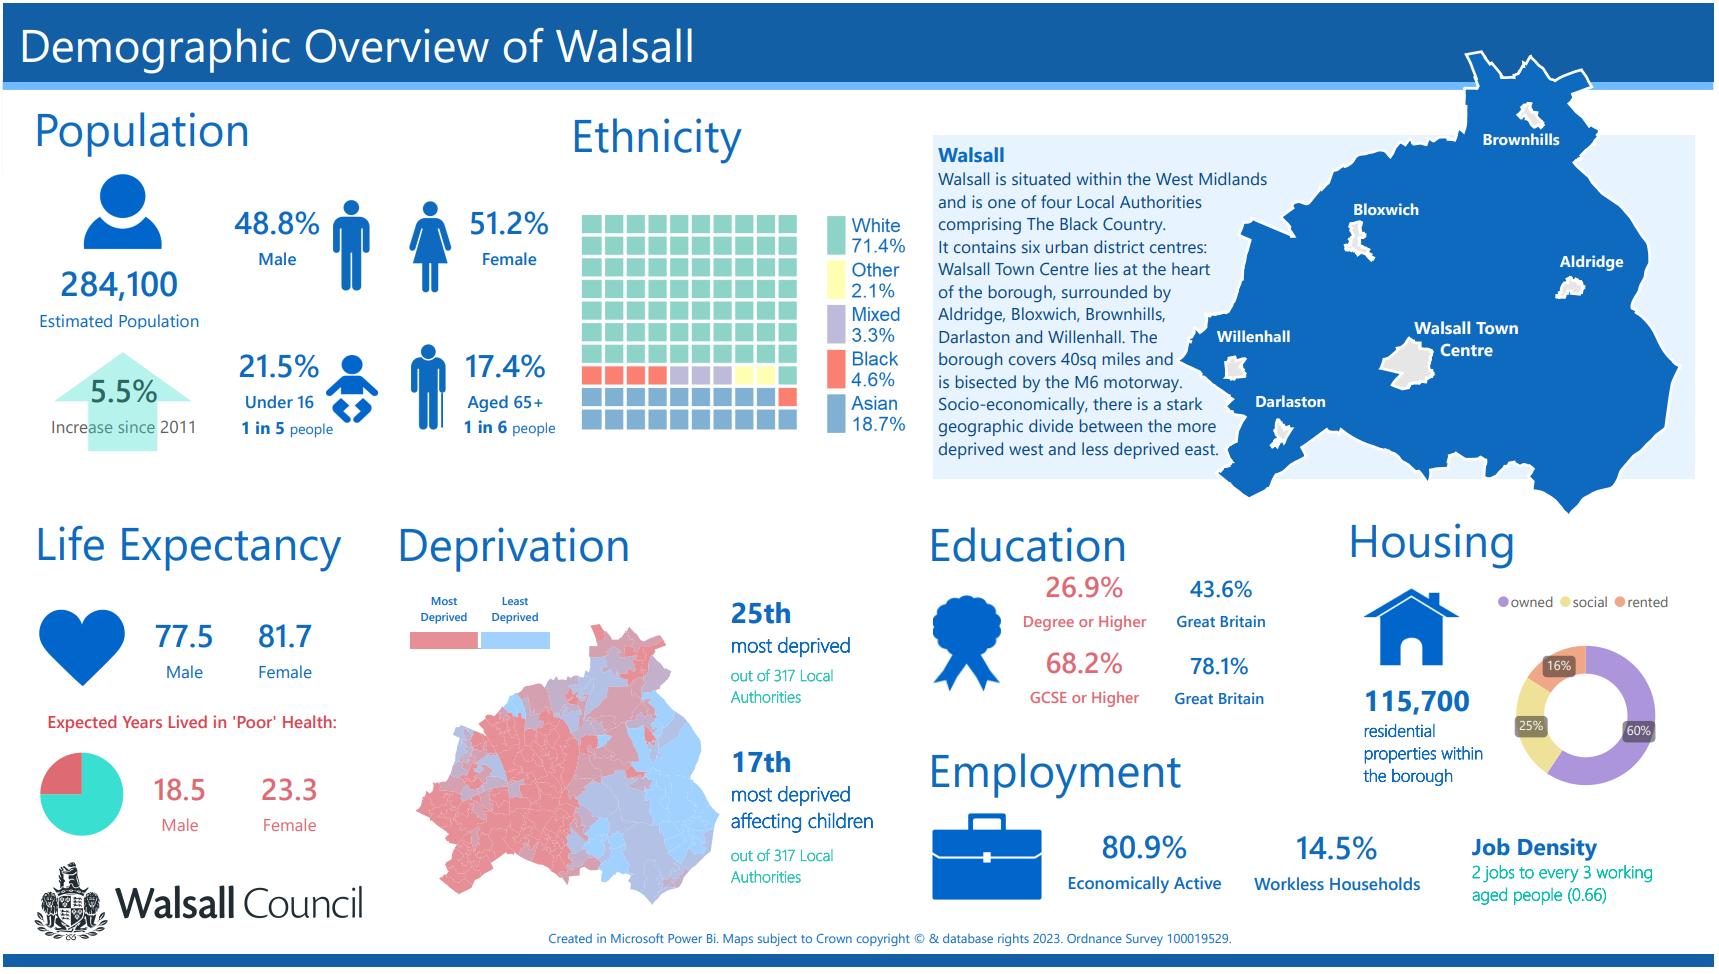 Infographic providing an overview of Walsall, including population breakdown, life expectancy and deprivation rank.